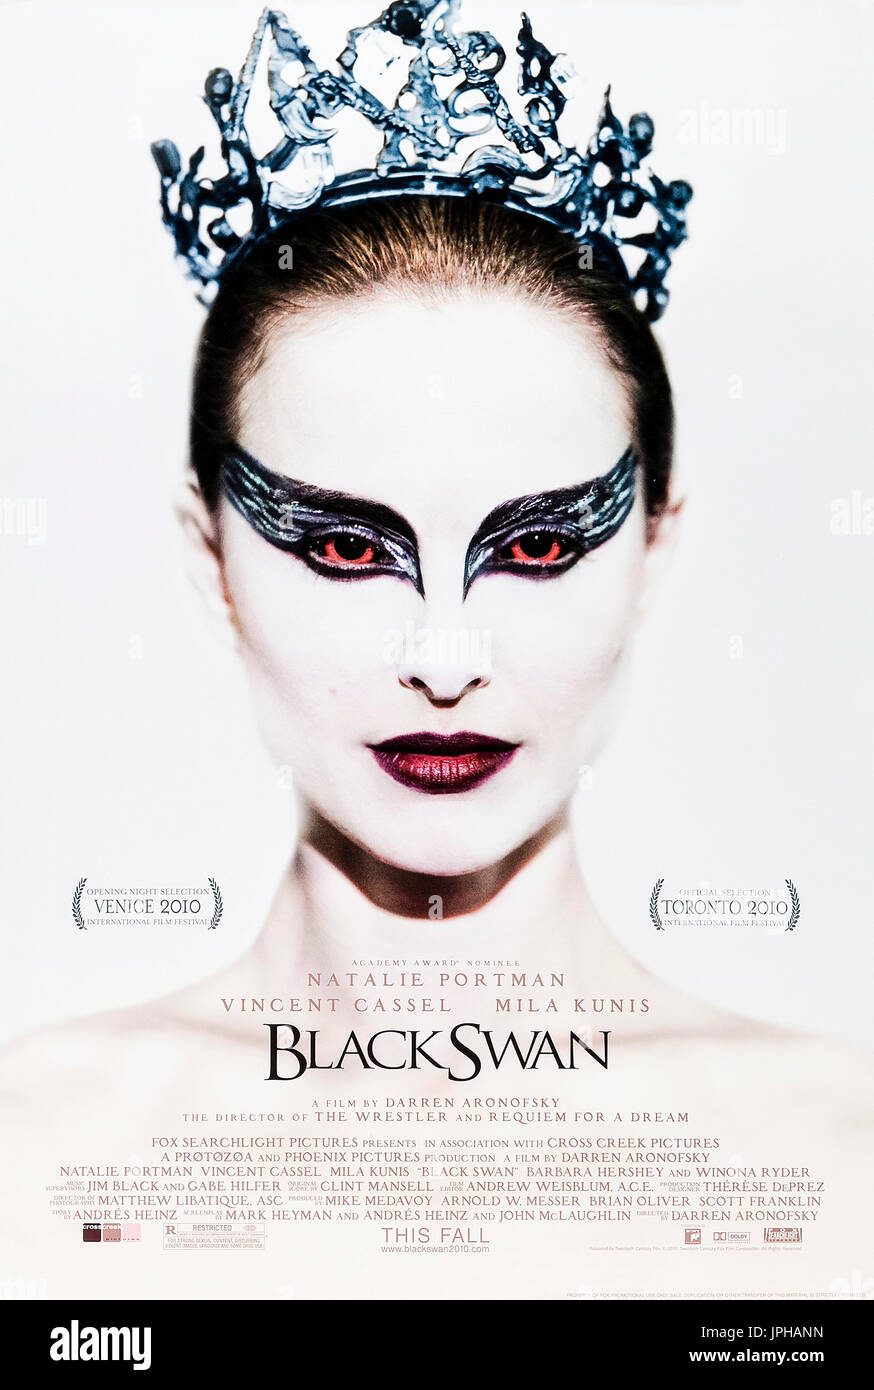 Black Swan (2010) directed by Darren Aronofsky and starring Natalie Portman, Mila Kunis and Vincent Cassel. Natalie Portman won the 2011 Oscar for Best Performance by an Actress in a Leading Role for her portrayal of Nina Sayers a ballerina caught in a conflict with a rival dancer for the role of The Swan Queen. See description below for more information. Stock Photo